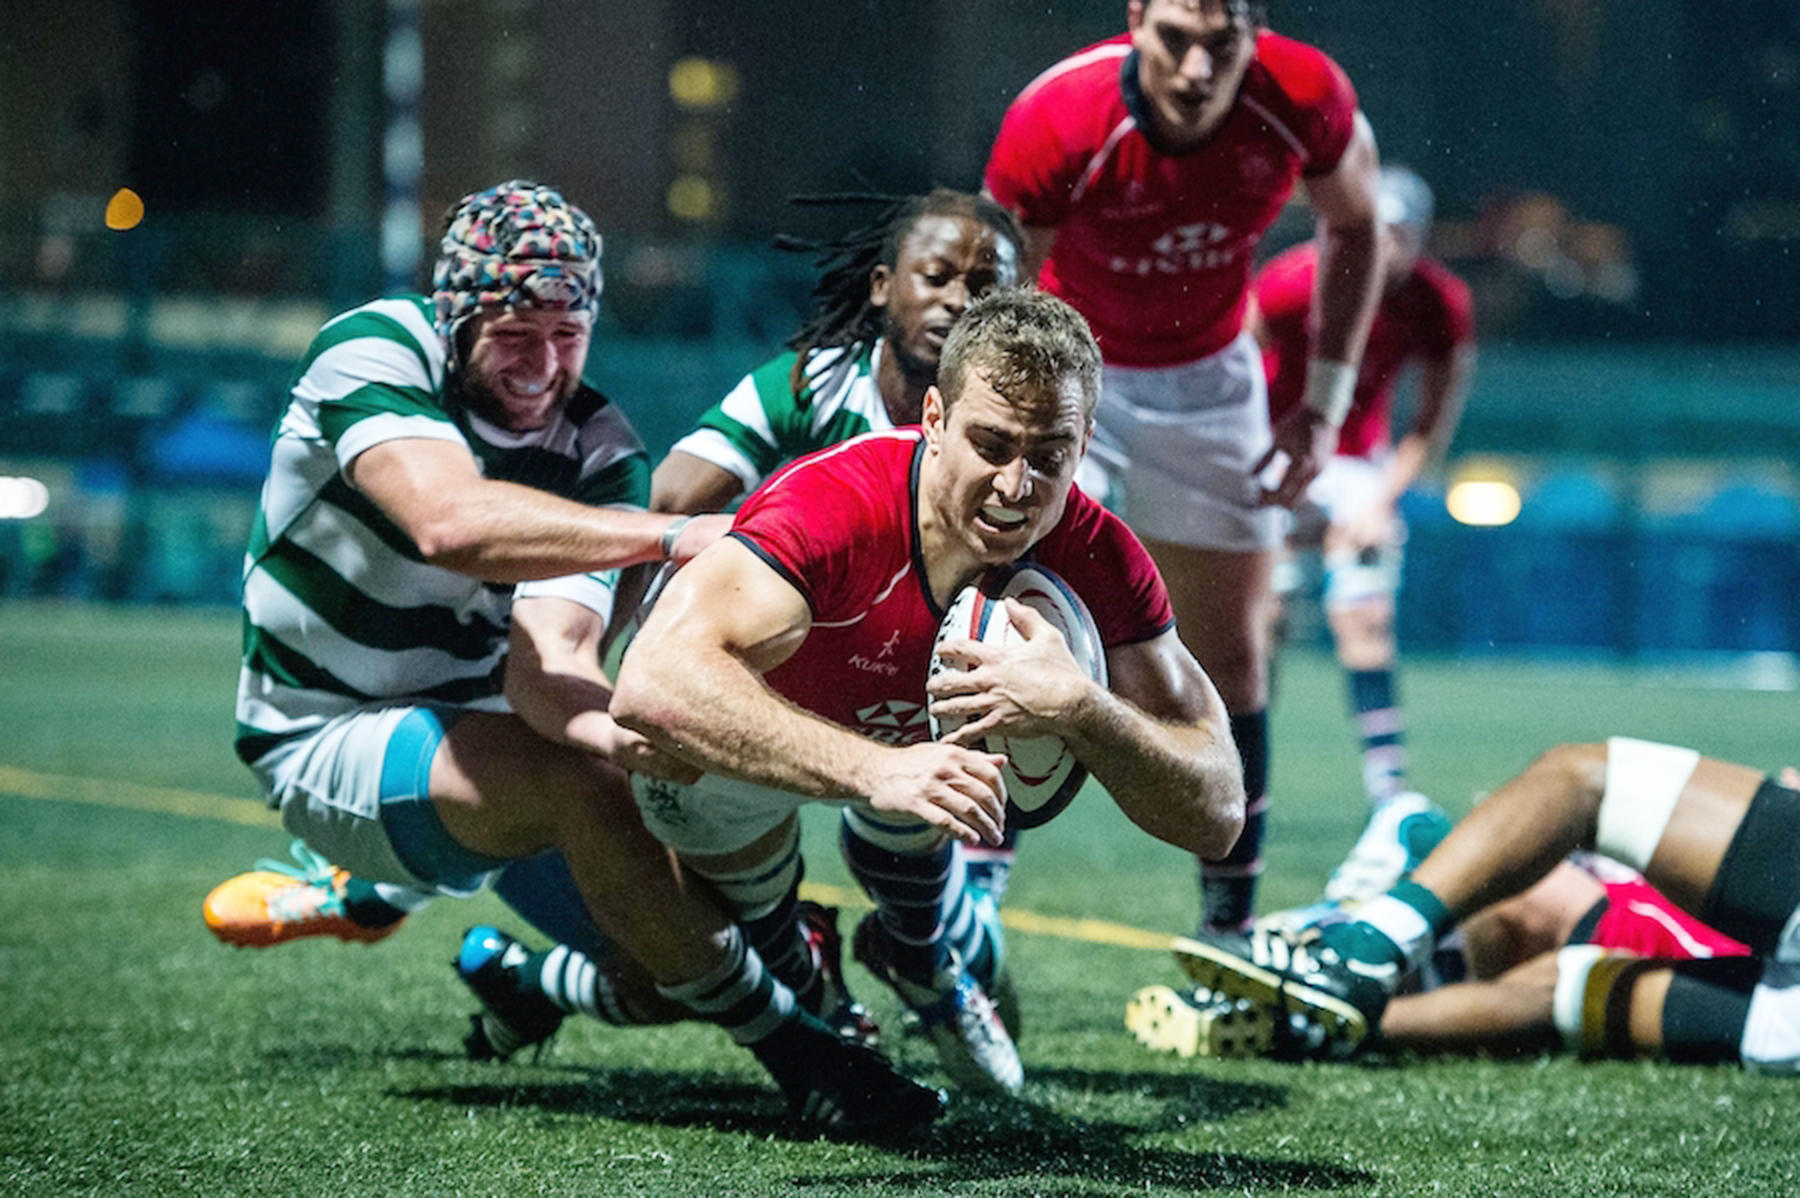 Hong Kong scrum-half Tom Marshall dives over to score against Zimbabwe in their Cup of Nations match on Friday. Photos: HKRU